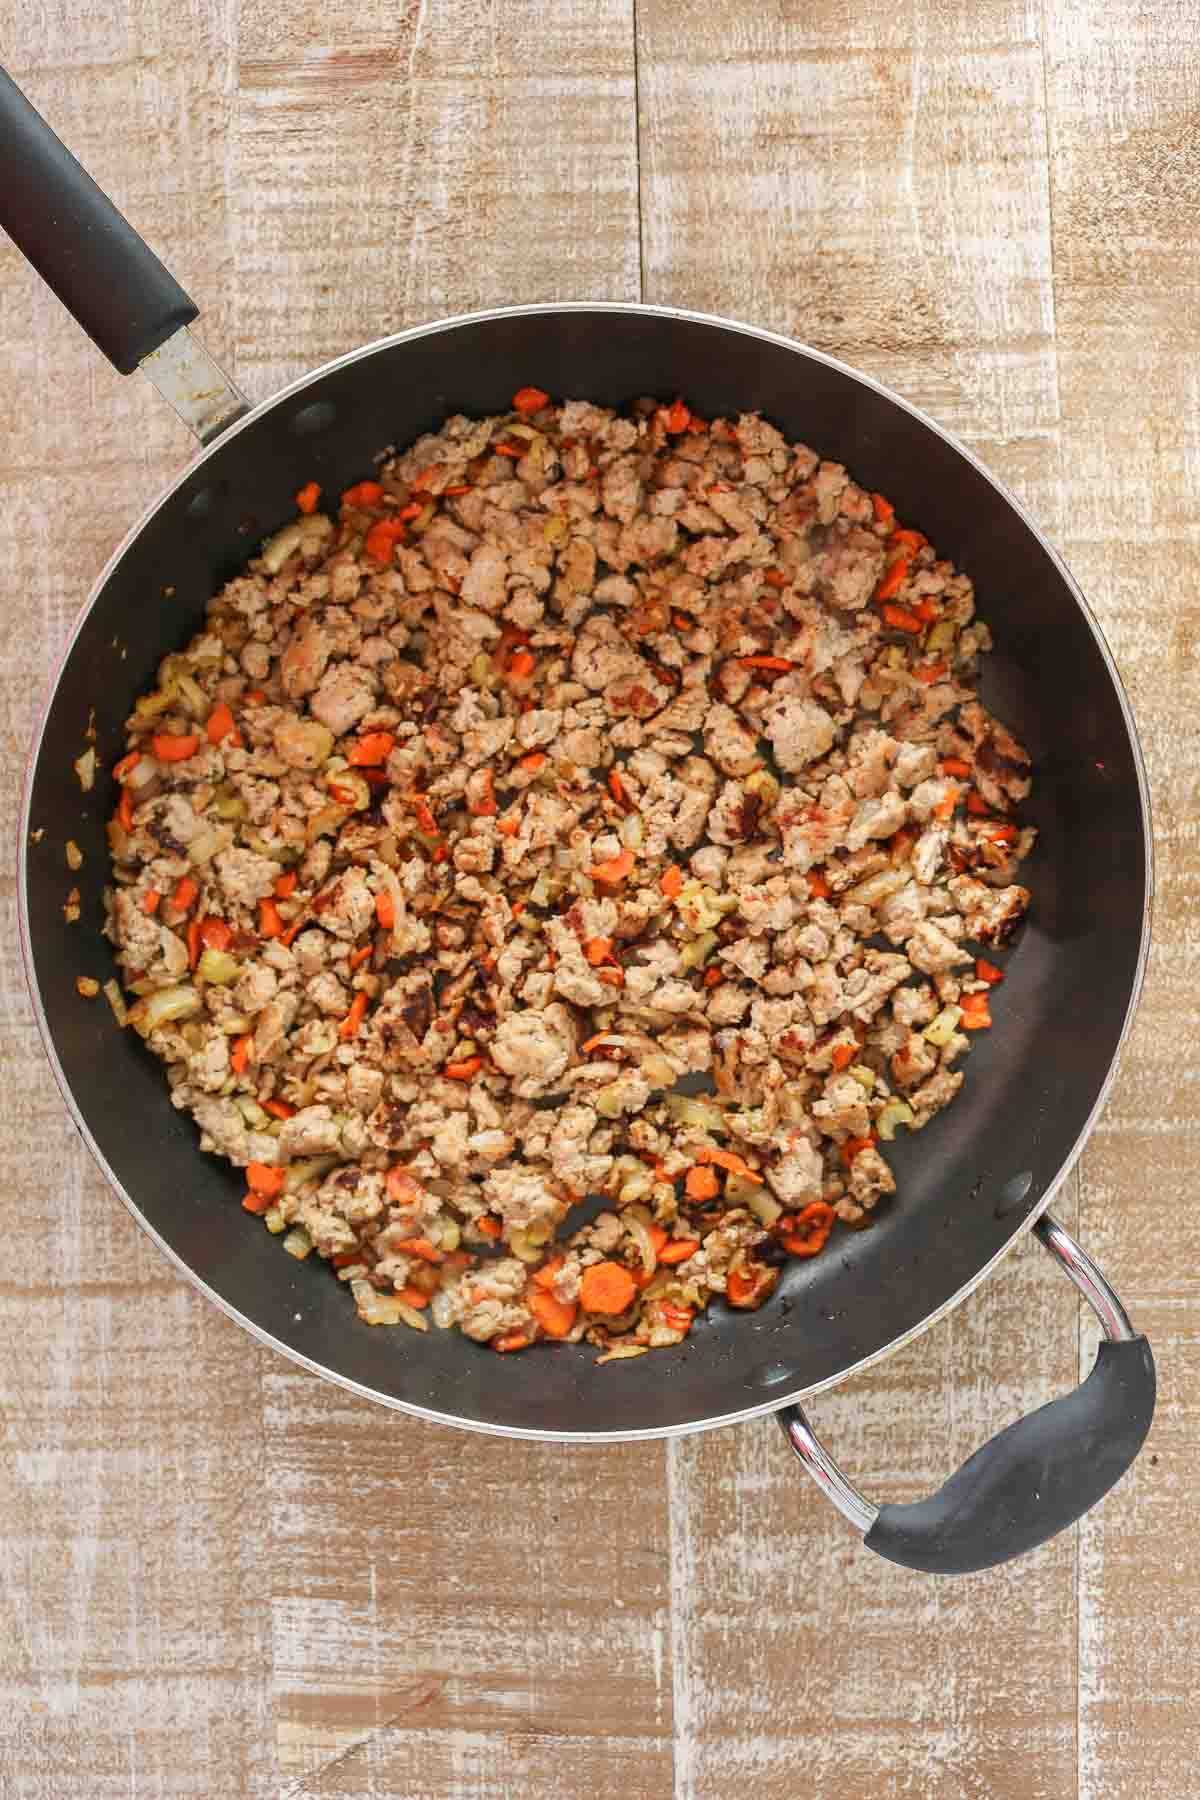 Cooked ground chicken and vegetables in a pan.